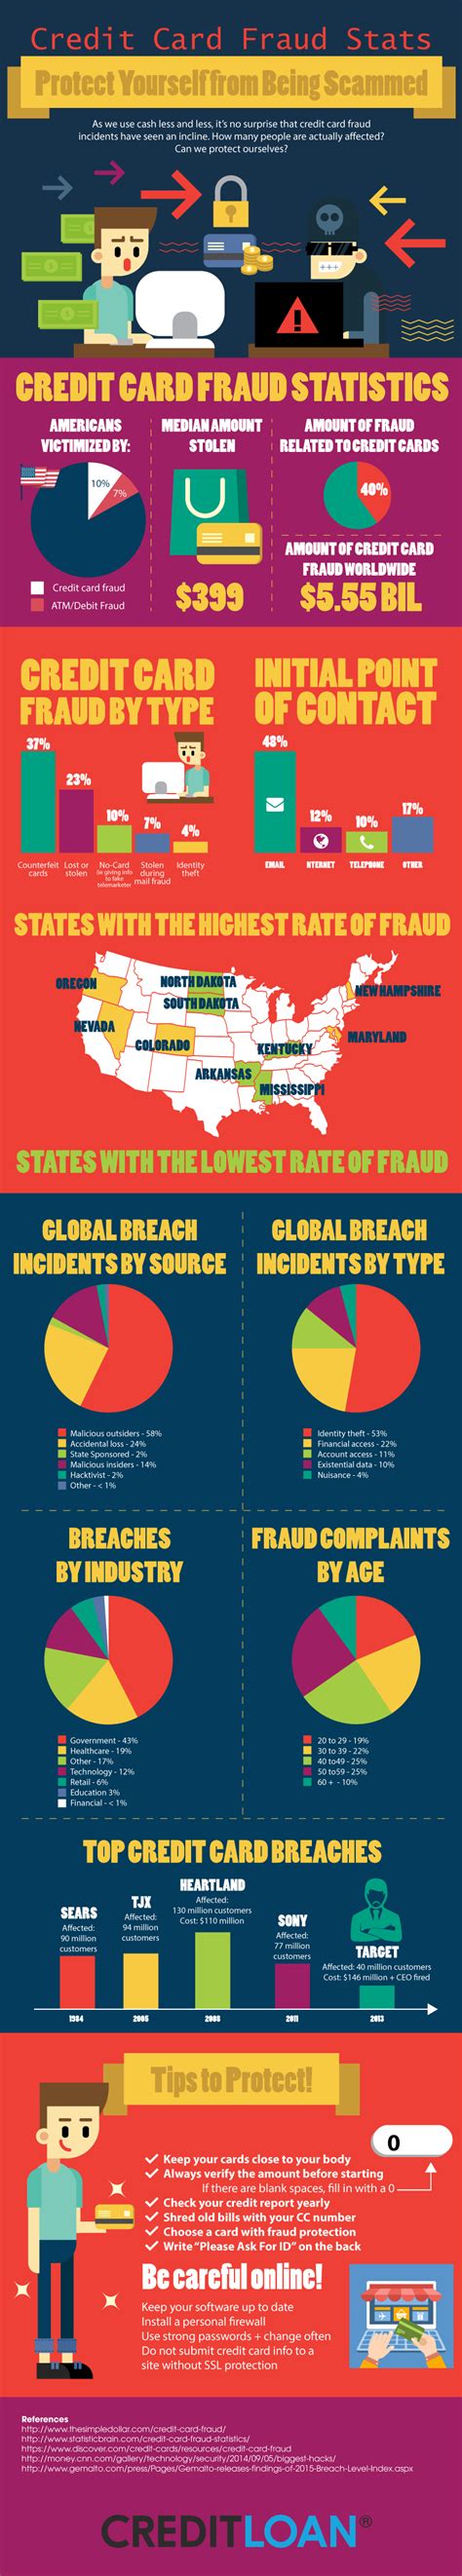 Credit card fraud is any kind of theft or fraud that involves a credit card. Credit Card Fraud Stats - Protect Yourself from Being Scammed - SavingAdvice.com Blog